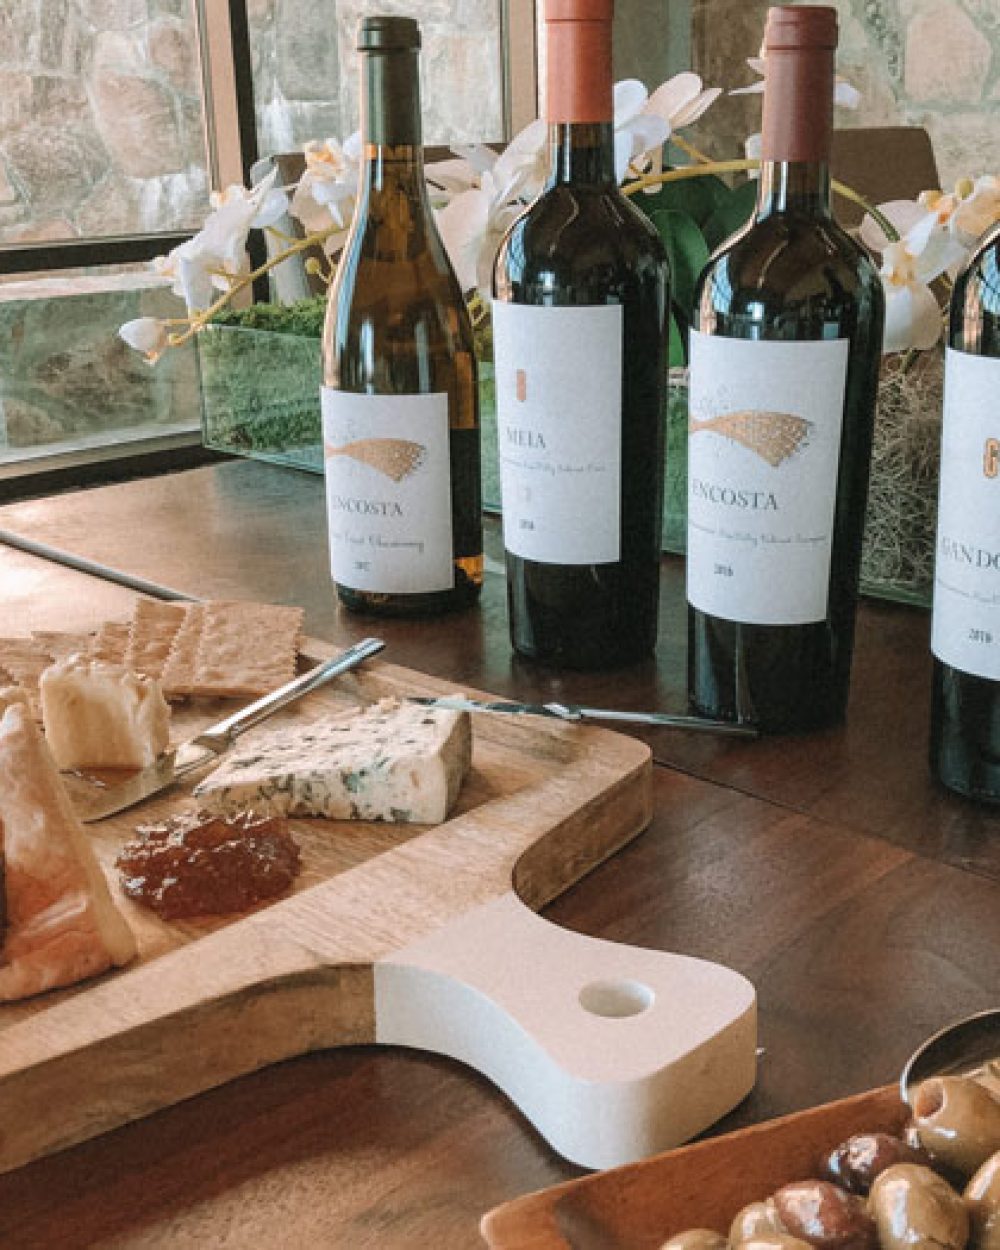 4 Steps to Planning the Perfect Day in Napa